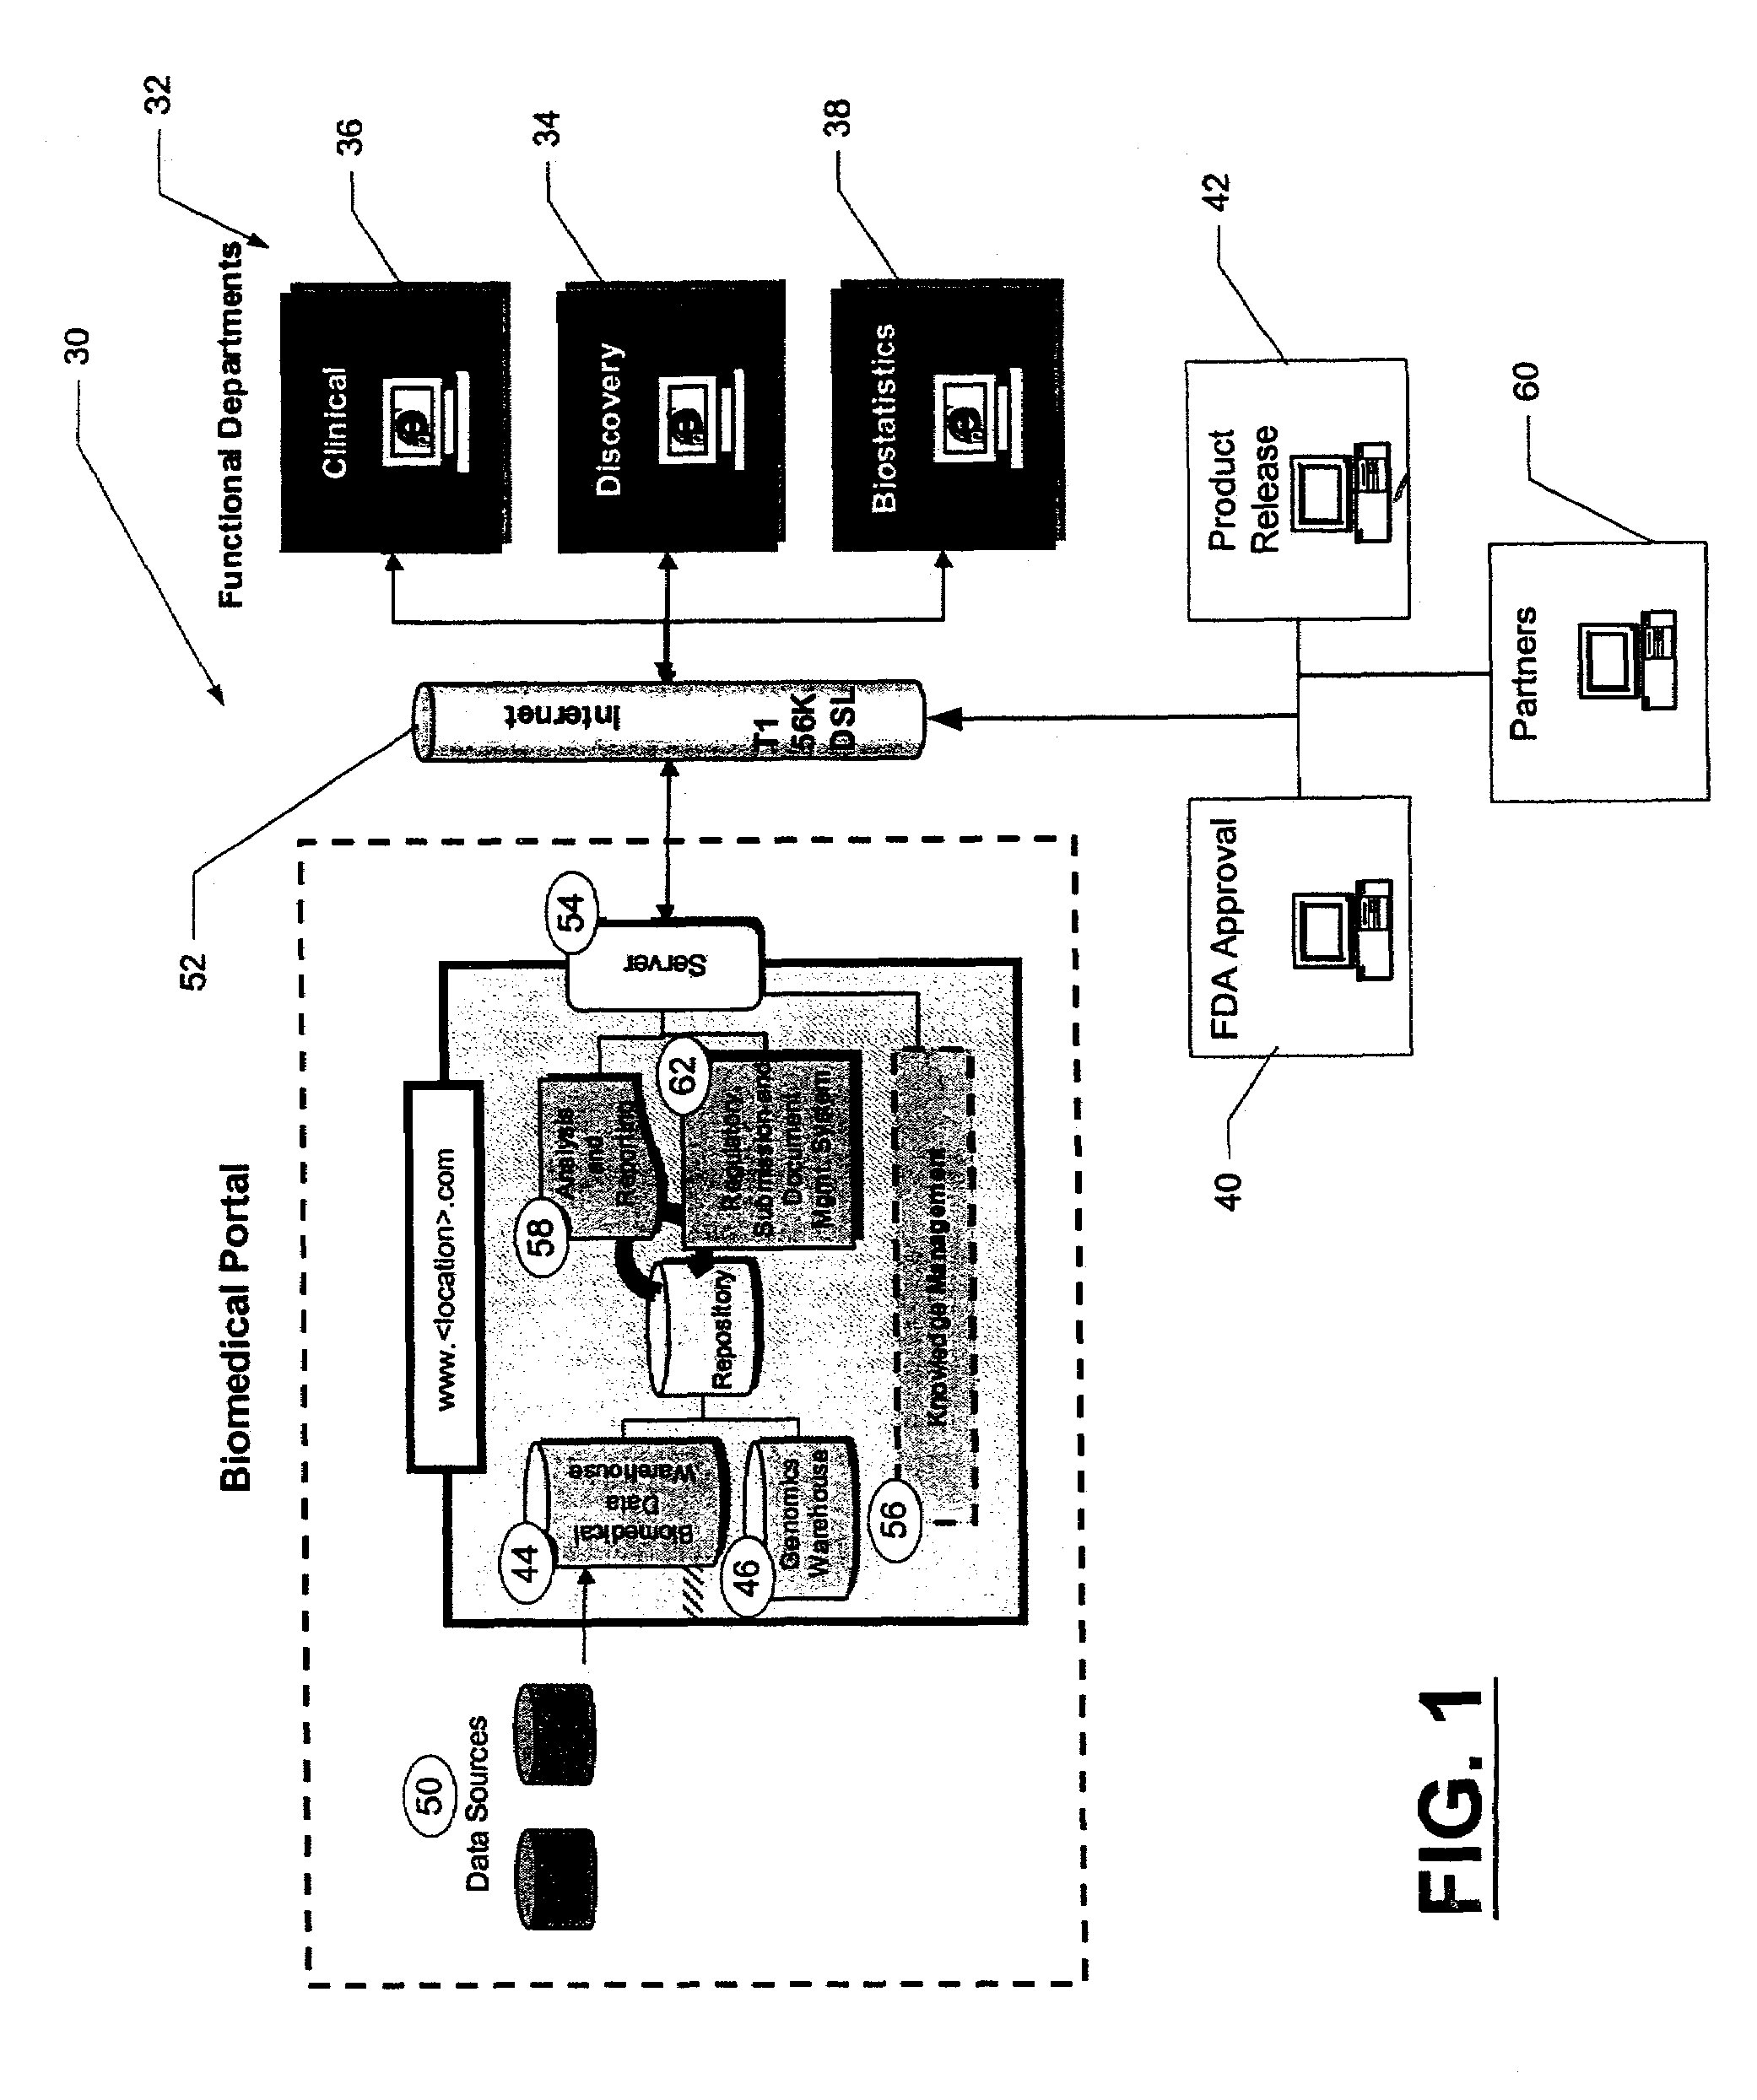 Integrated biomedical information portal system and method